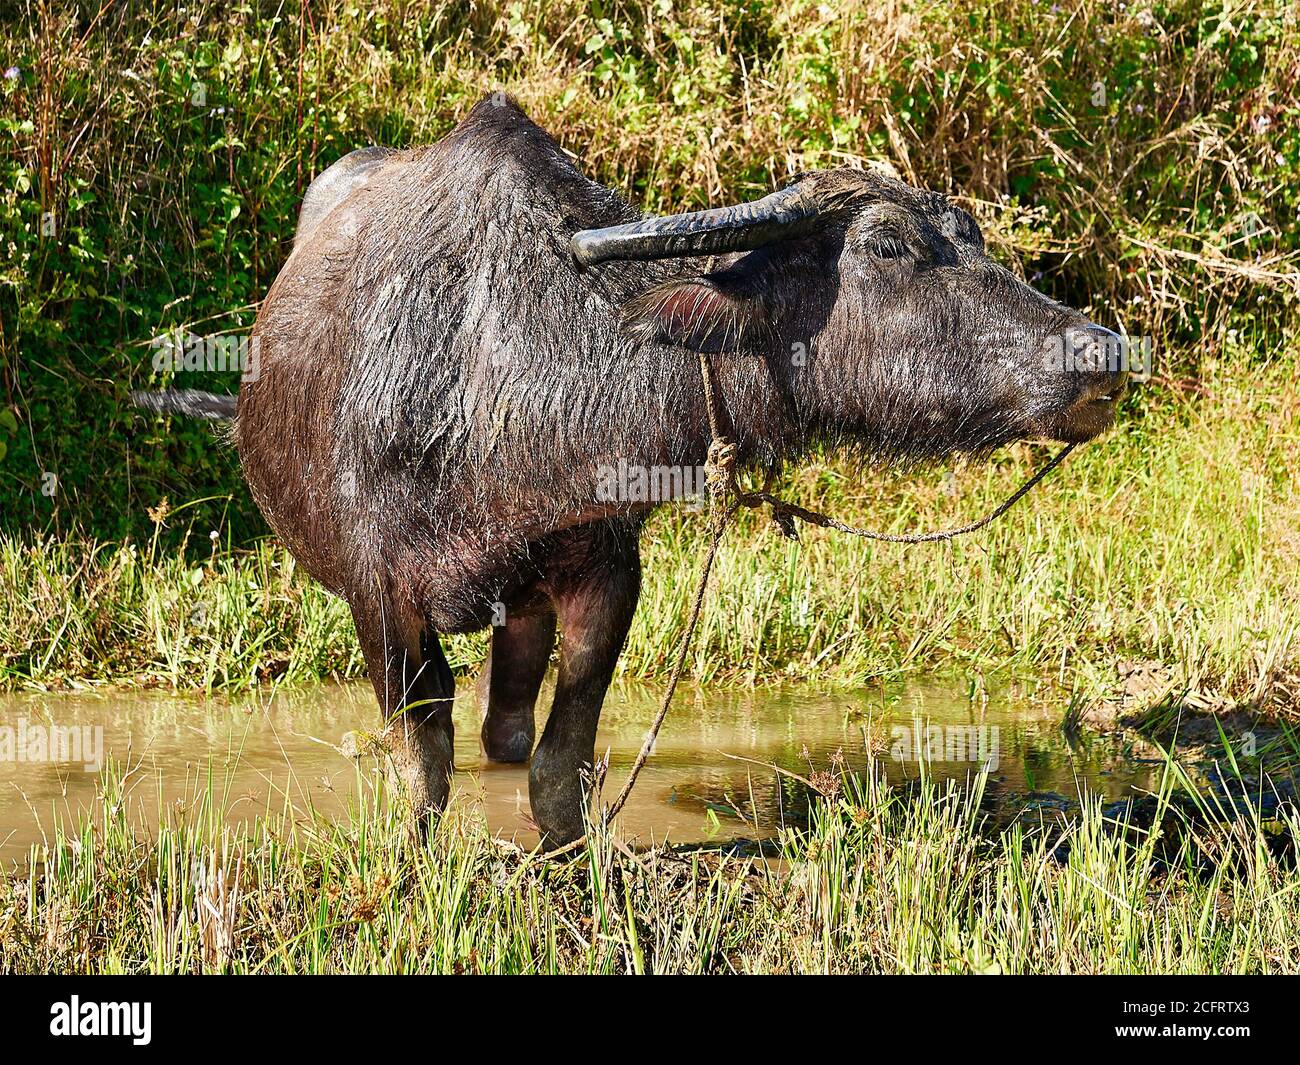 Close-up portrait of a big water buffalo carabao standing in green rice fields near Sagada town, Mountain Province, Luzon, Philippines Stock Photo